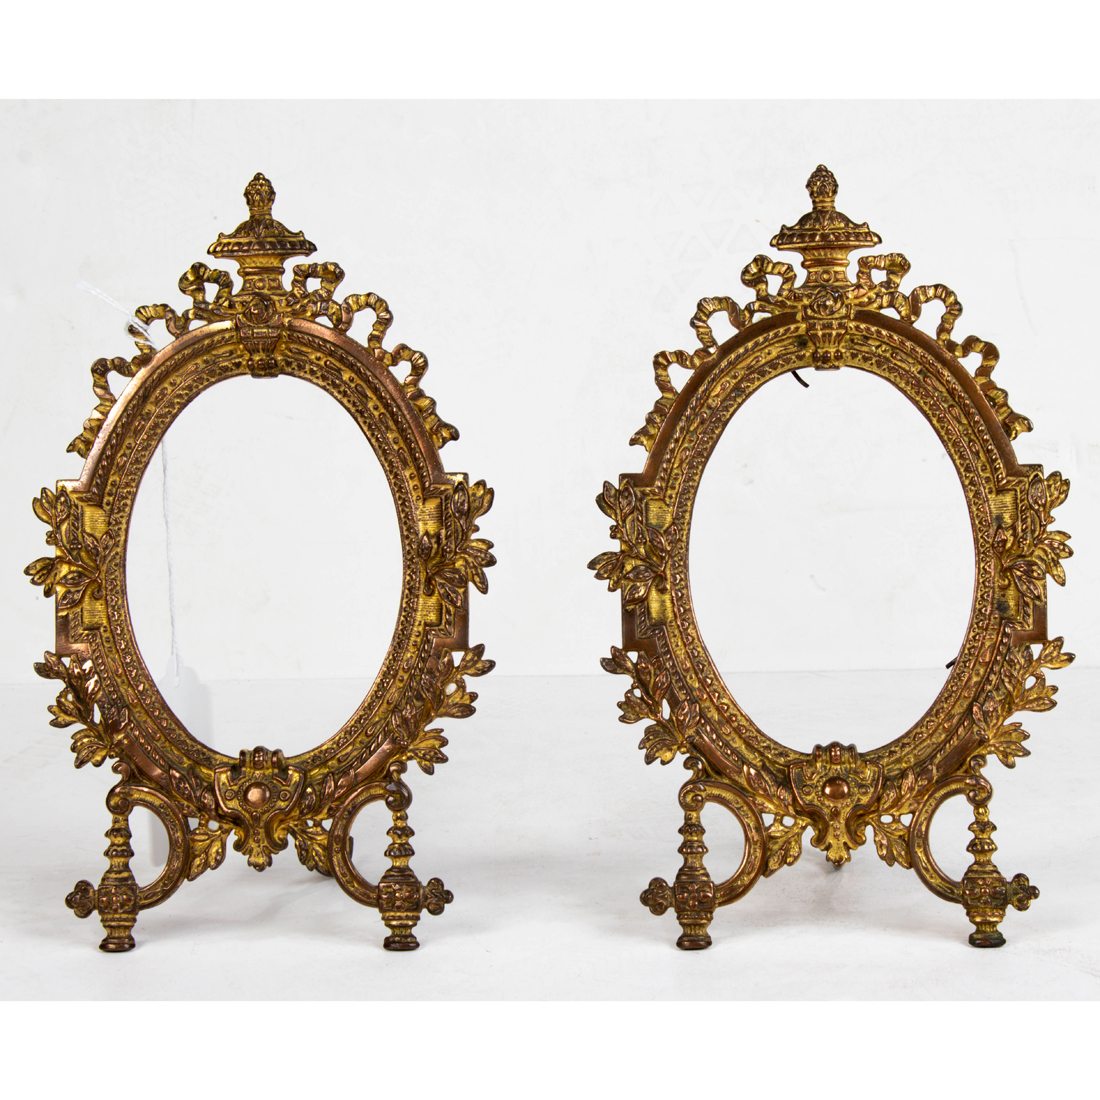 PAIR OF NEOCLASSICAL STYLE GILT 2d2cb9